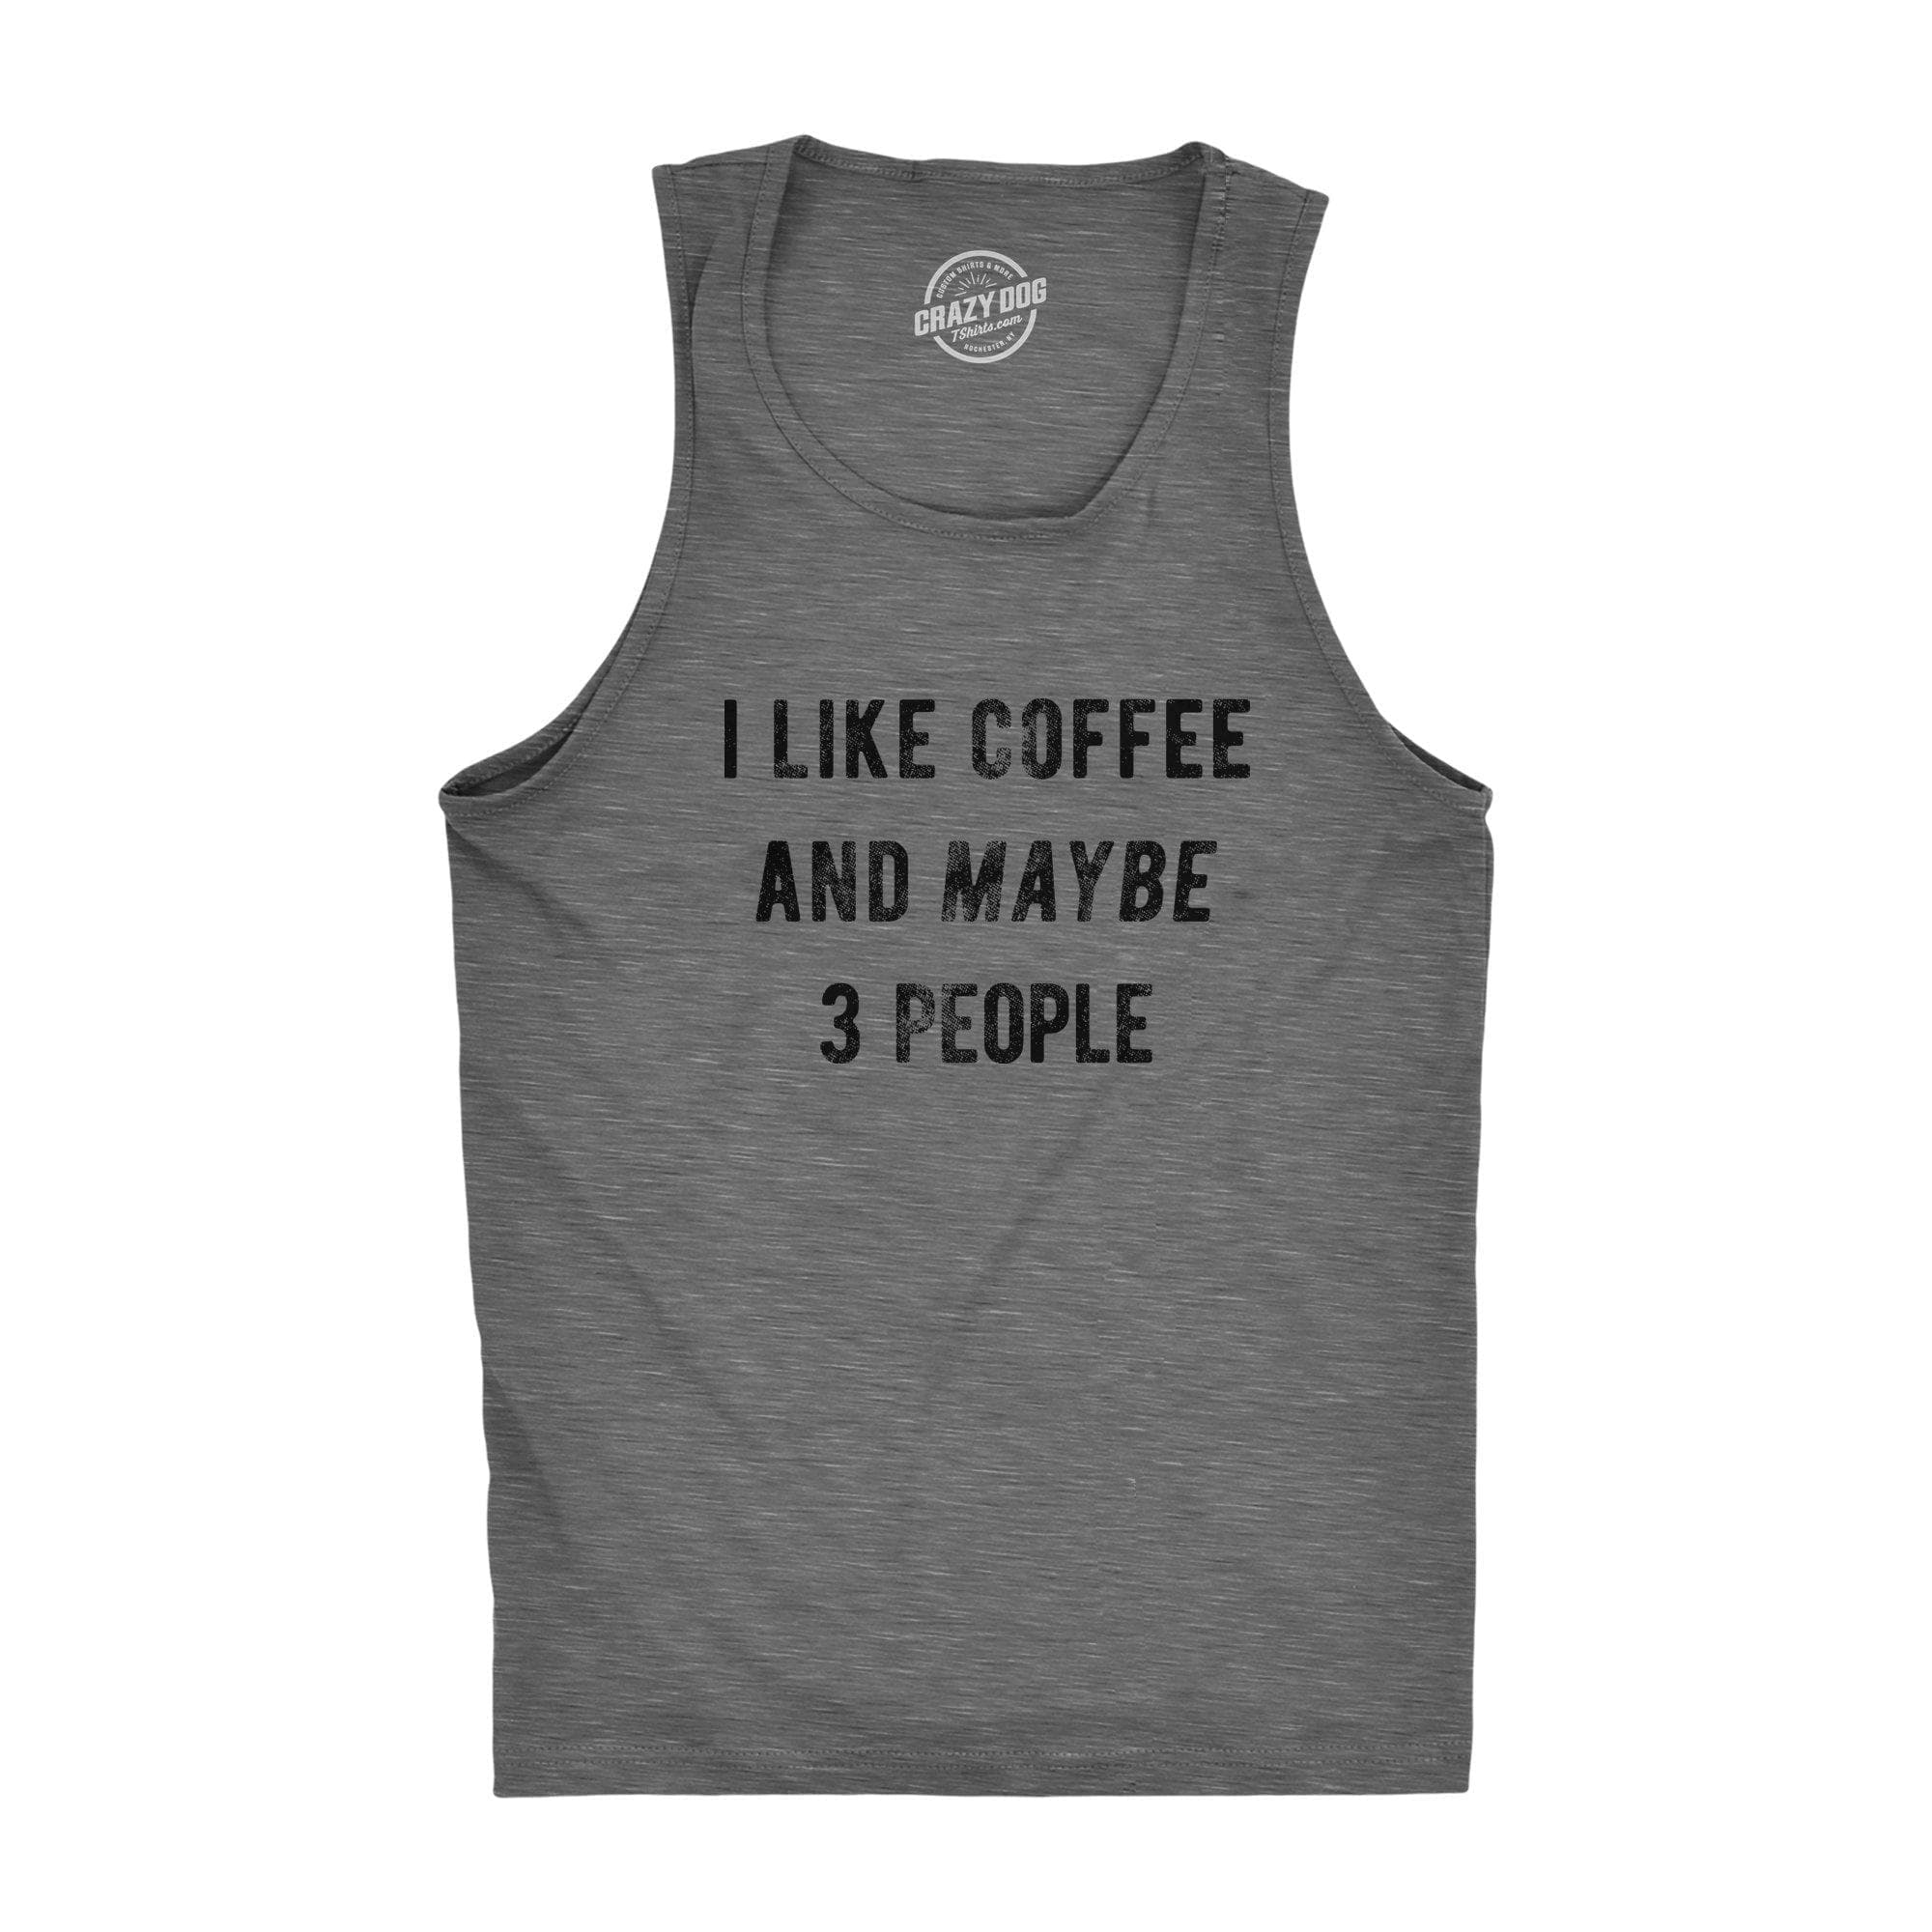 I Like Coffee And Maybe 3 People Men's Tank Top - Crazy Dog T-Shirts